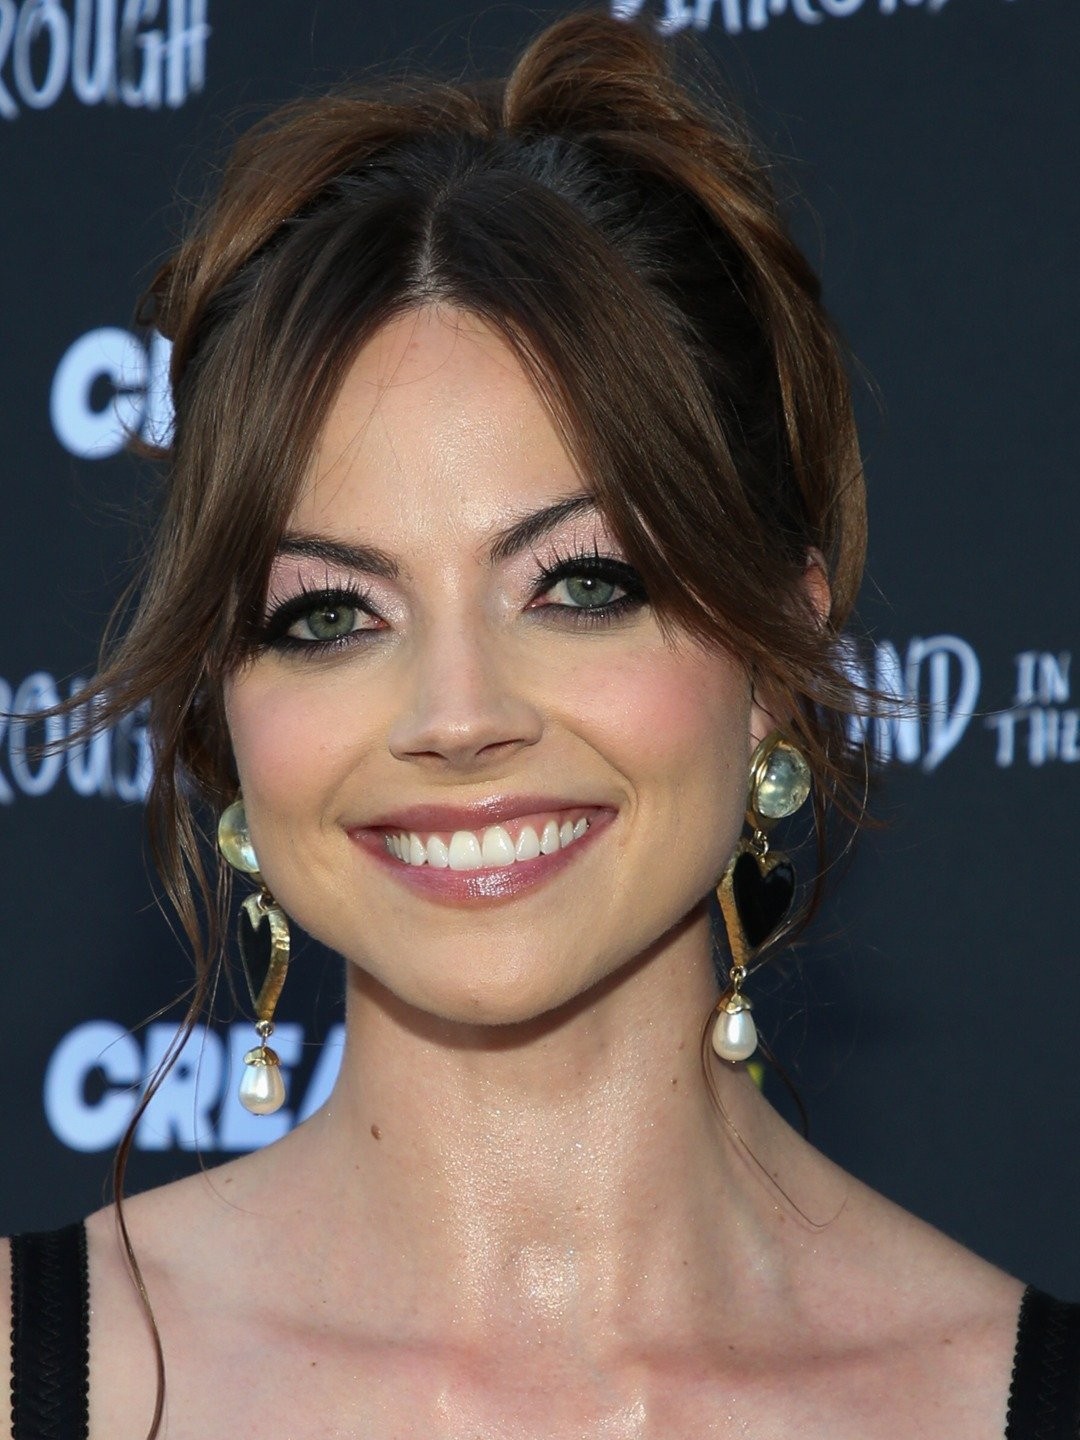 Caitlin carver movies and tv shows